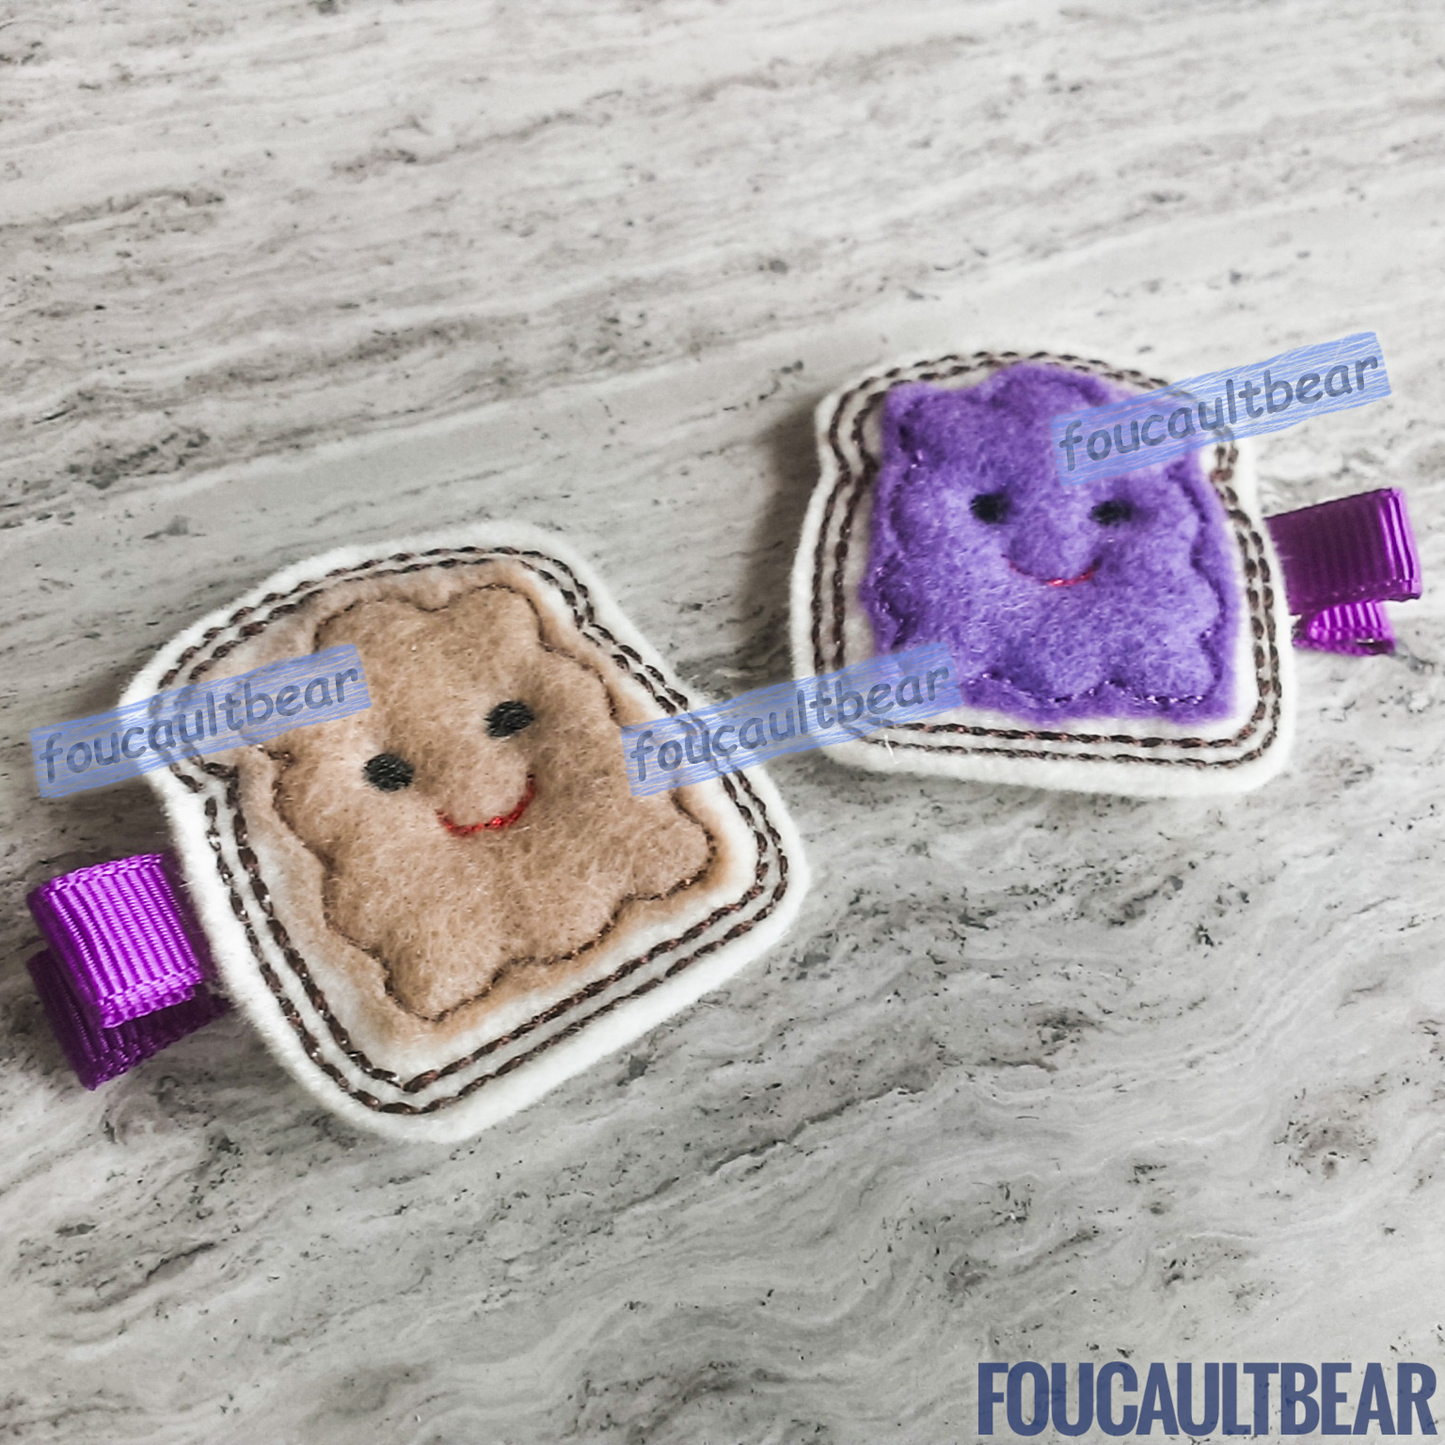 Foucaultbear's HANDMADE HAIR CLIPPIES. Set of Peanut Butter & Jelly (Grape). Embroidered Soft Felt Centerpieces. Partially Lined Alligator Hair Clips. This darling PB&J Hair Clip Set is perfect for toddlers, preschoolers, kindergartners, grade-schoolers or babies with enough hair to wear them, year-round. Very Versatile, in my opinion. Each bread measures in at approximately 1 3/4 inches (4.5 cm) in height. Attached with 1 3/4 inch (4.5 cm) partially lined alligator clips. 